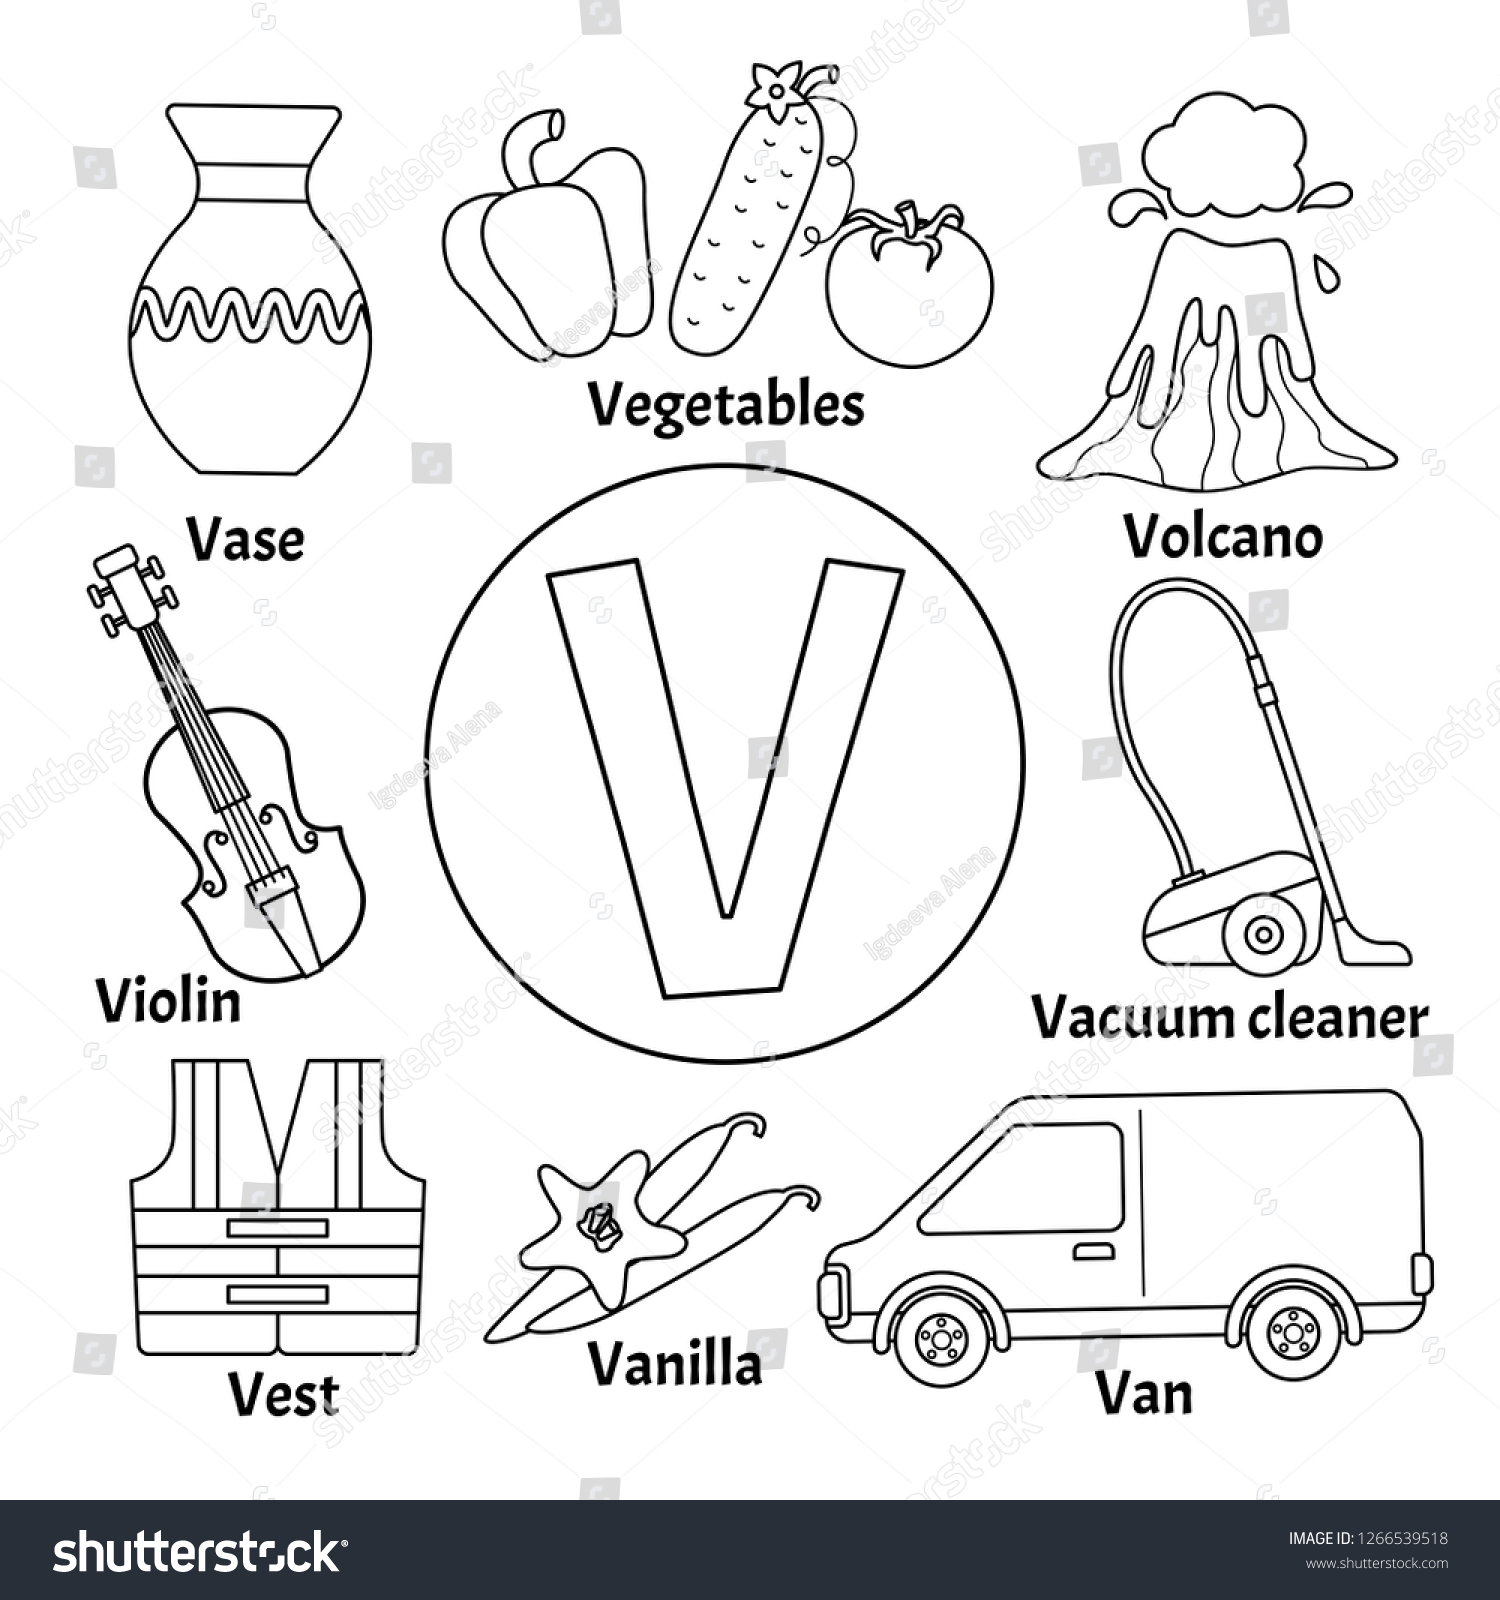 V coloring page images stock photos d objects vectors